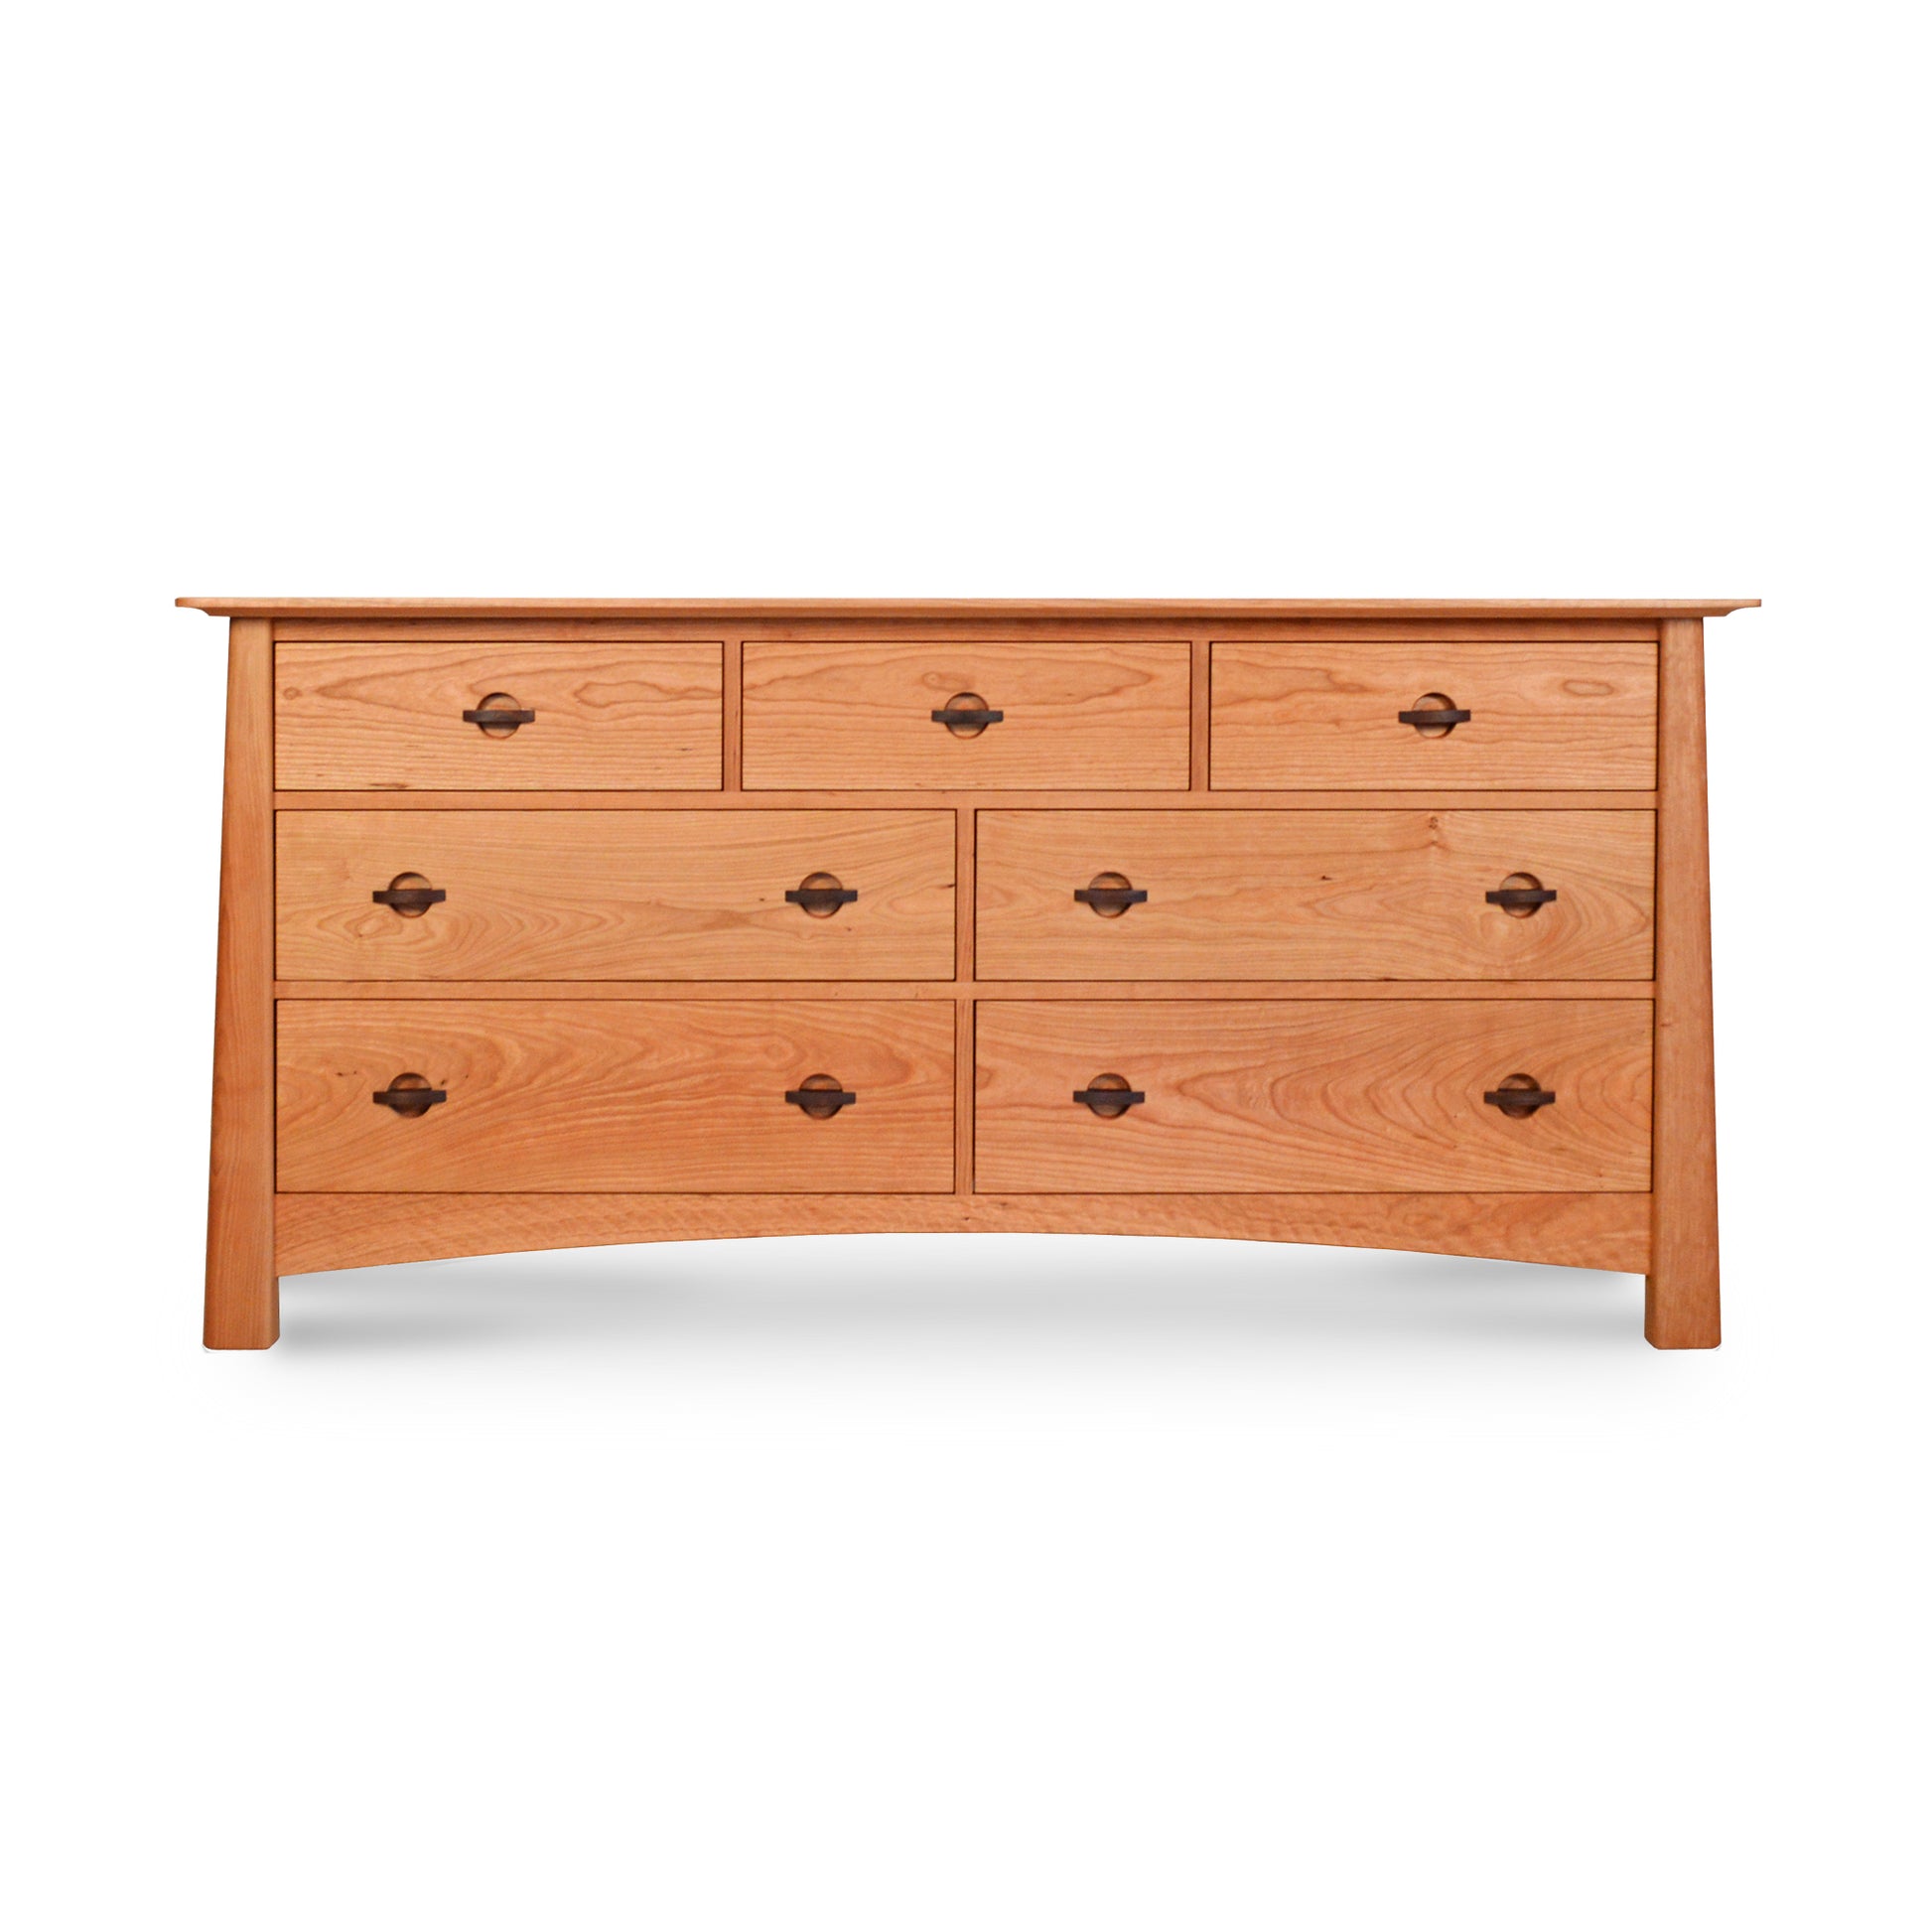 A handmade Cherry Moon 7-Drawer Dresser by Maple Corner Woodworks, each featuring a round knob, displayed against a white background. The dresser has a smooth finish and a slightly curved bottom edge.